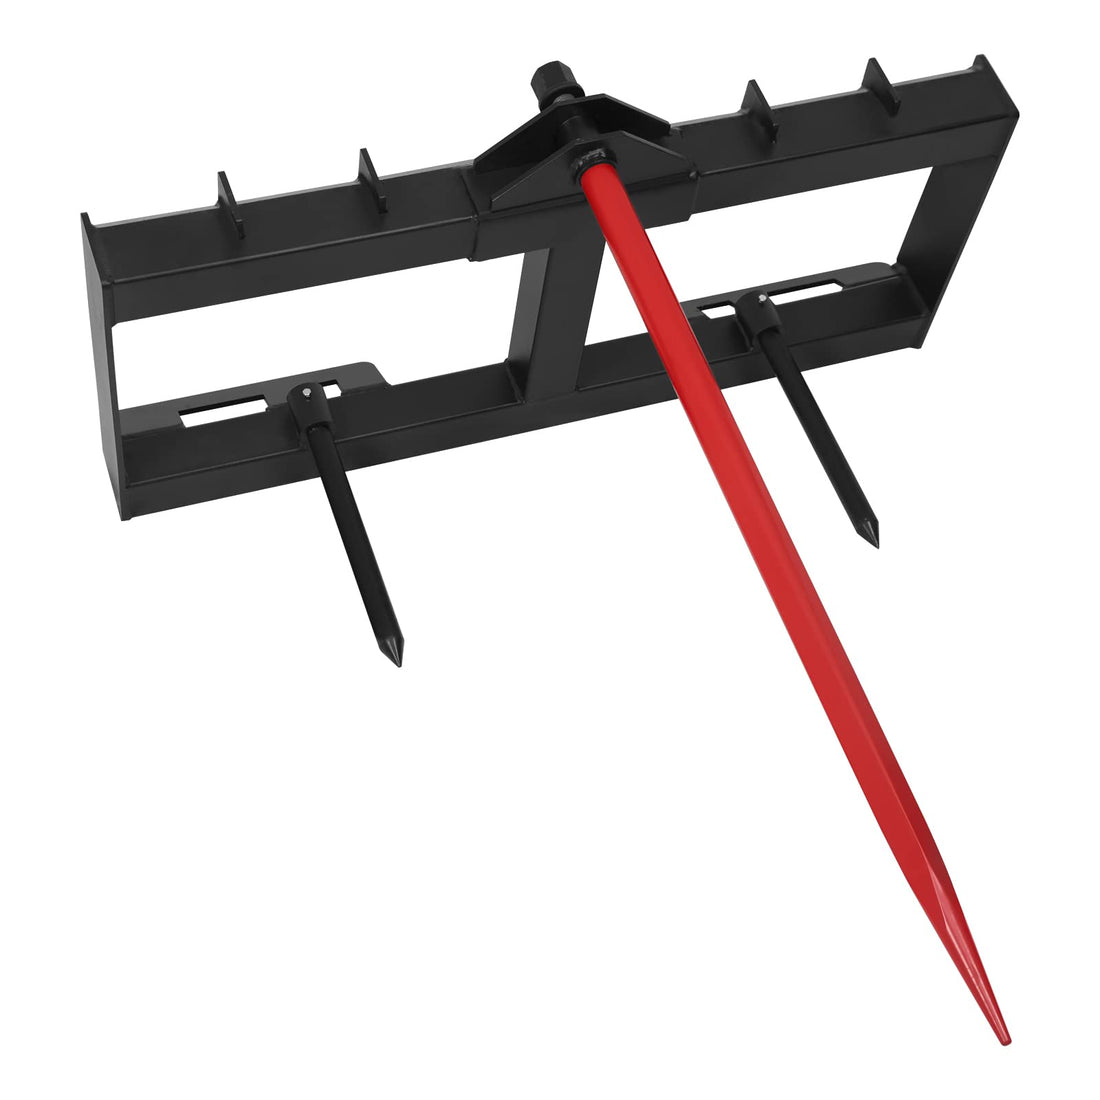 49 Inch Tractor Hay Spear Attachment 3000lbs Capacity for Bobcat Tractors Skid Steer Loader